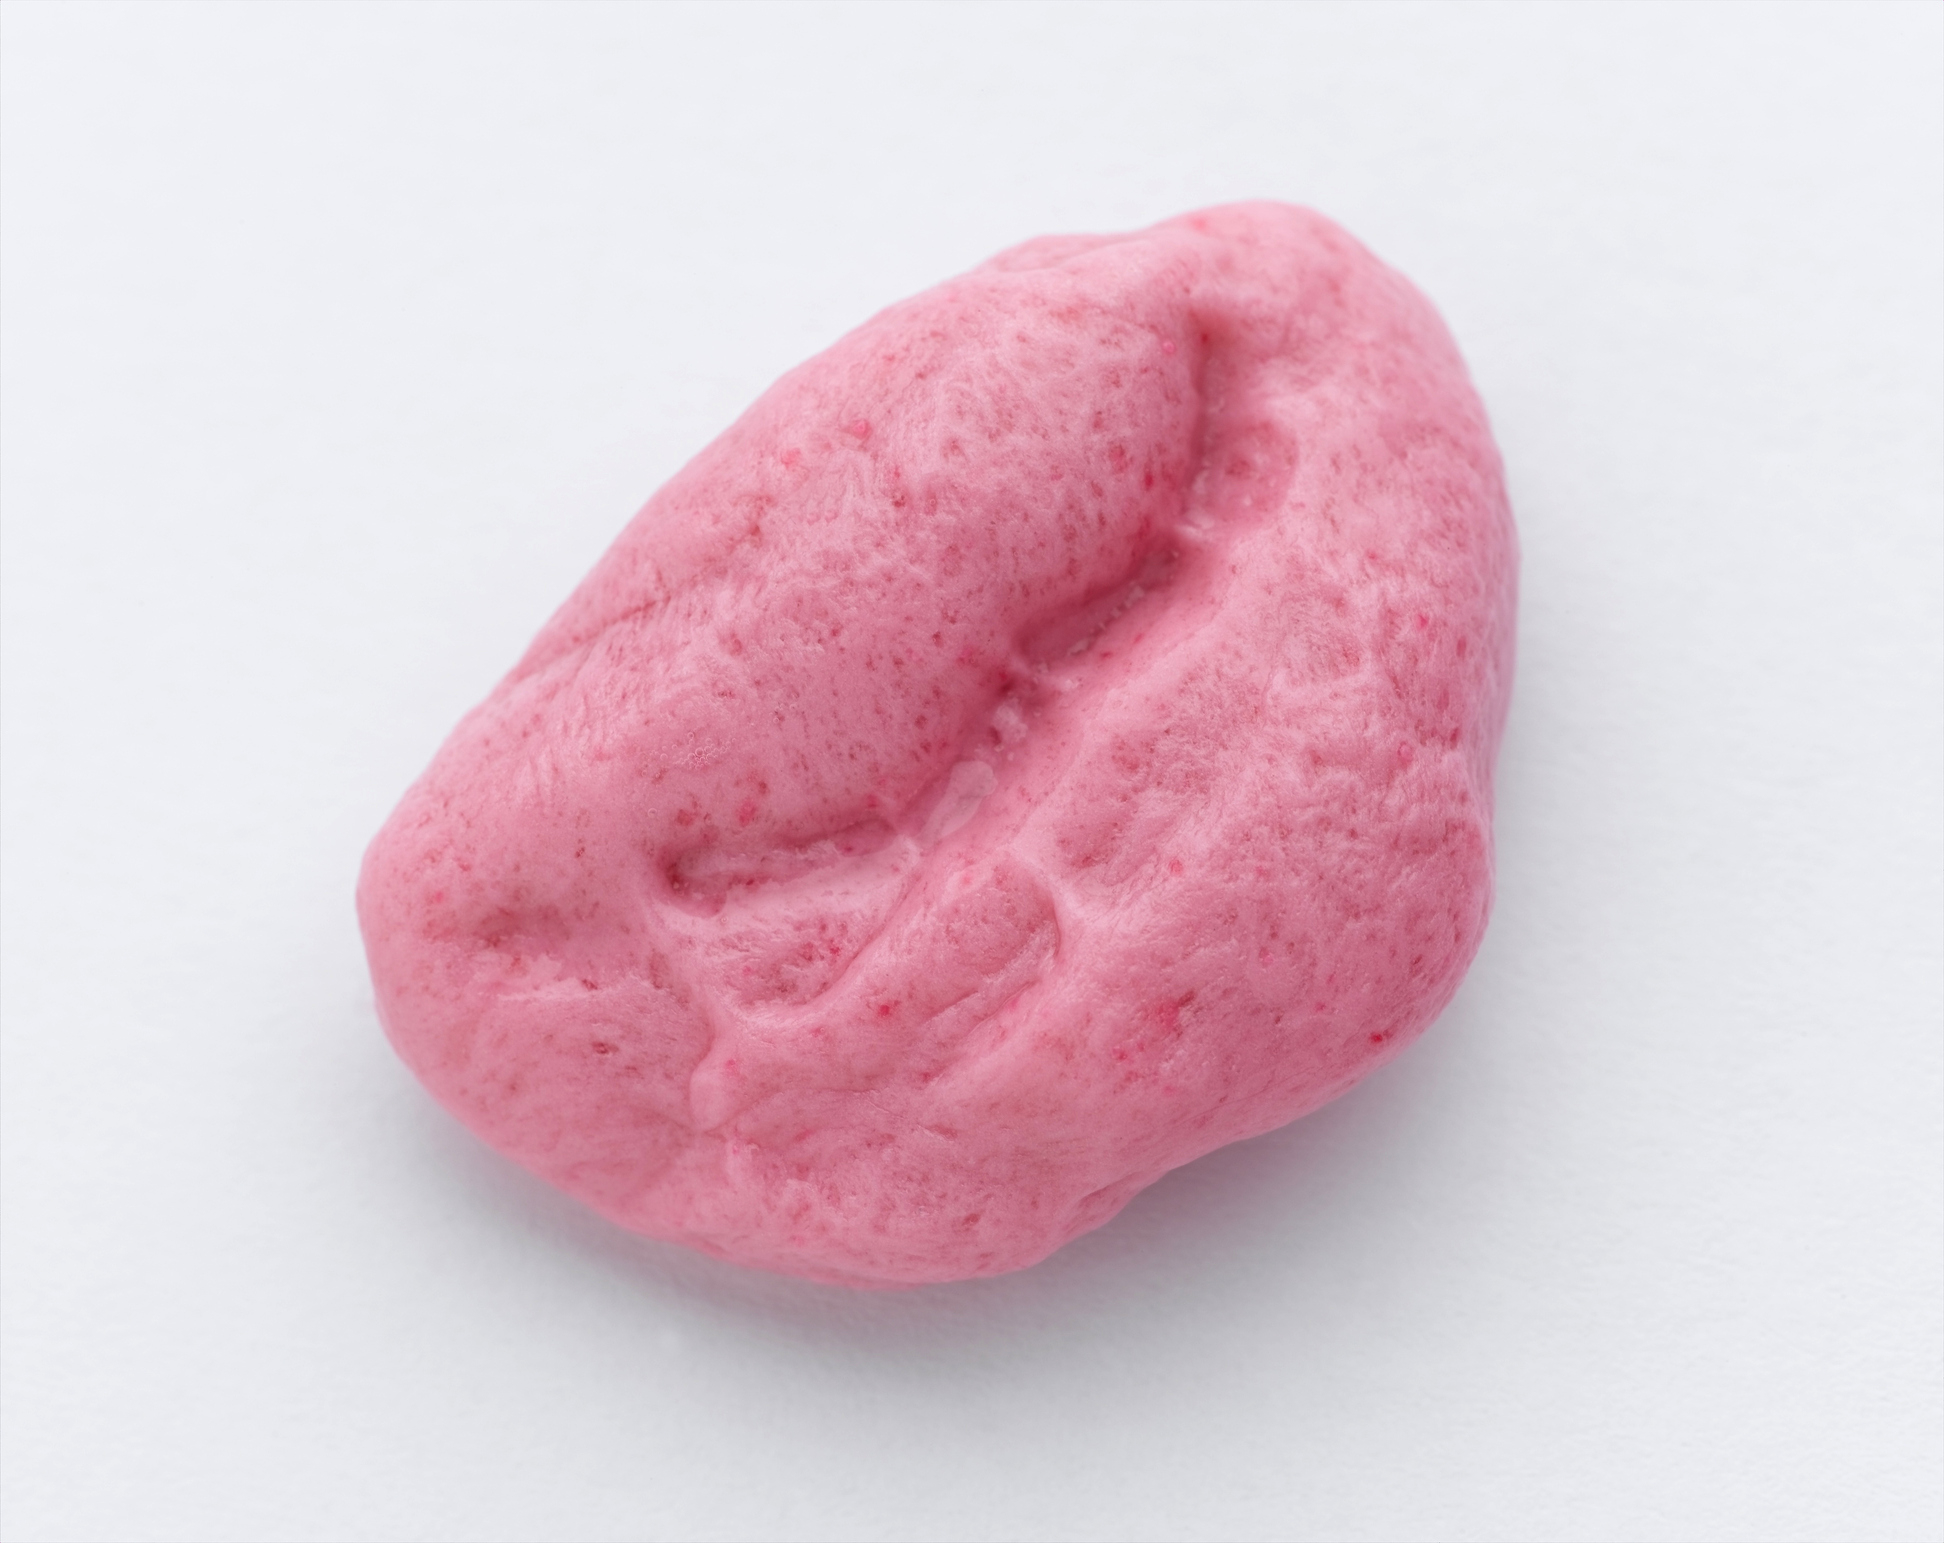 A pink, chewed bubble gum piece against a white background